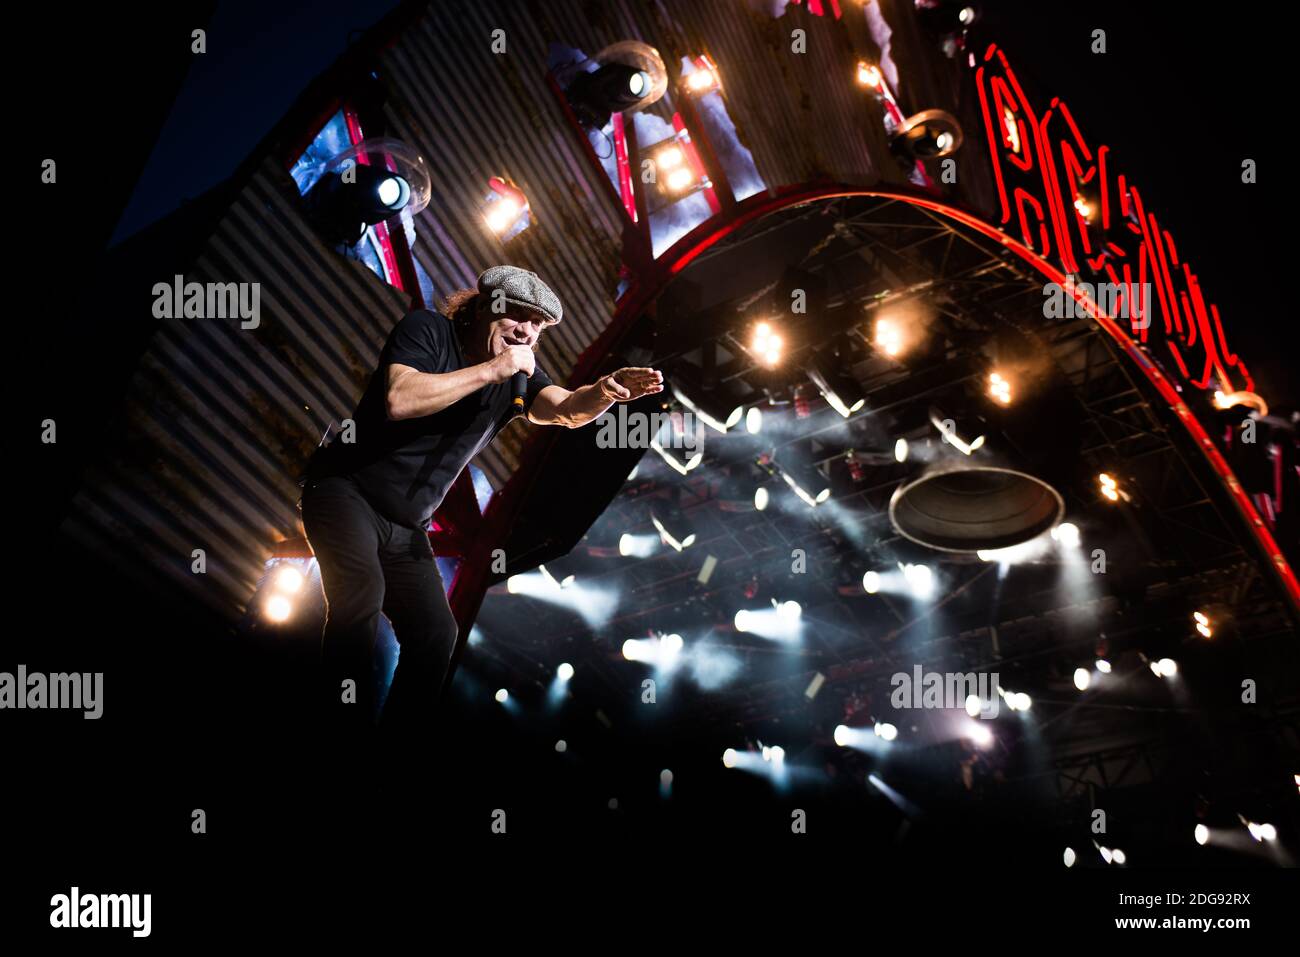 Brian Johnson, of the Australian rock band AC/DC, performing live for the “Rock or Bust World Tour” at the Autodromo Enzo e Dino Ferrari of Imola, Italy Stock Photo